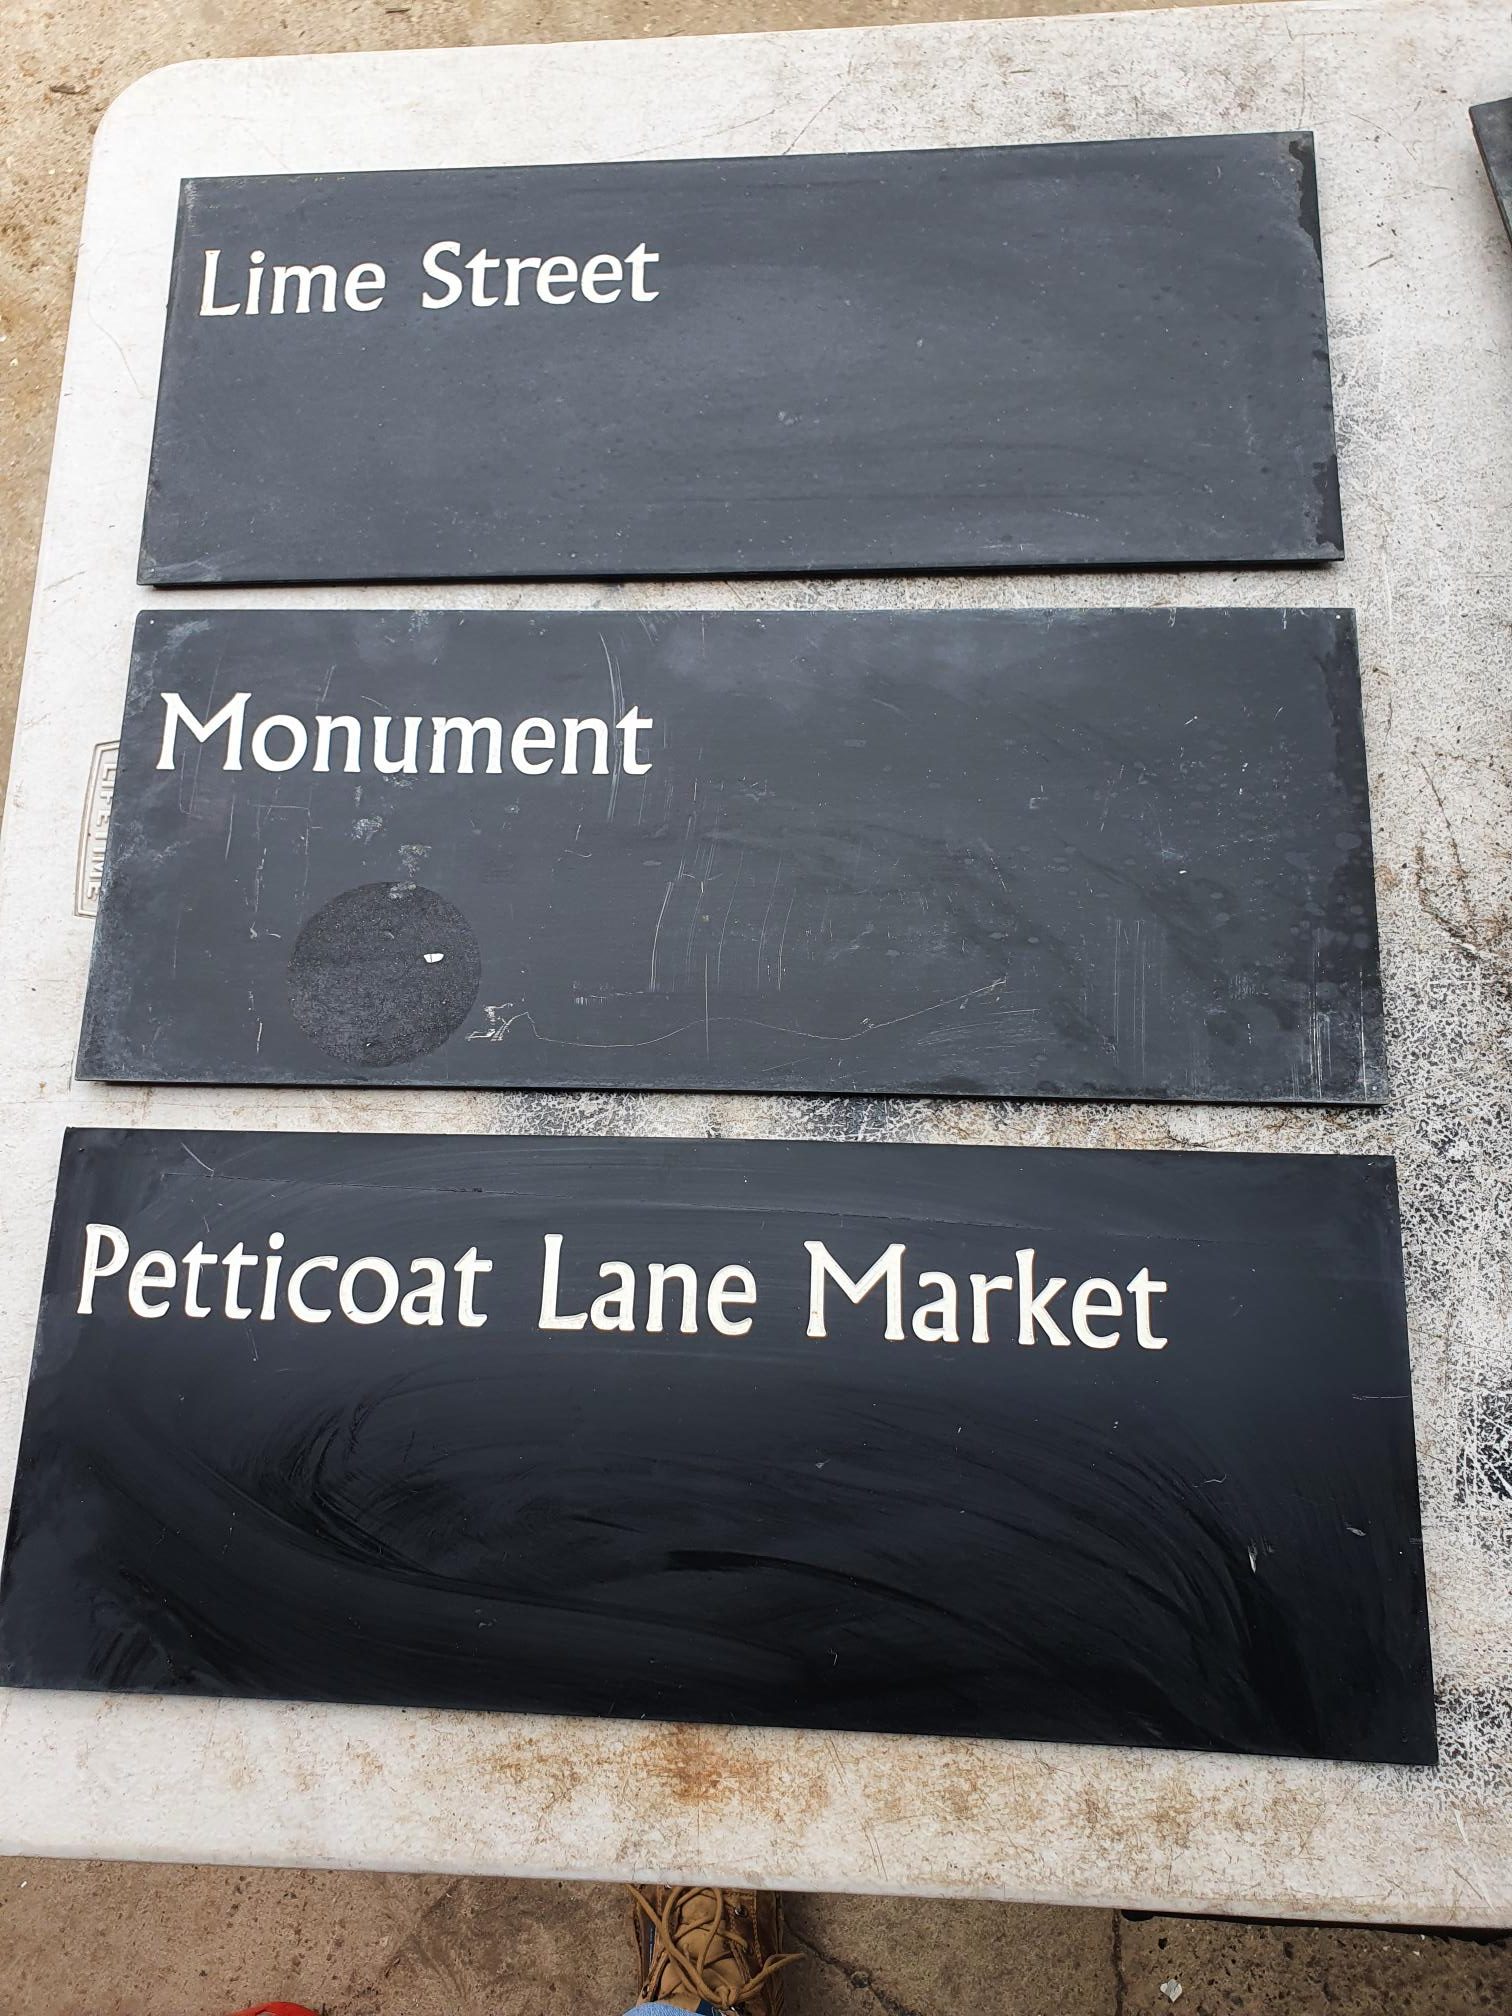 City of London Famous Name Plates